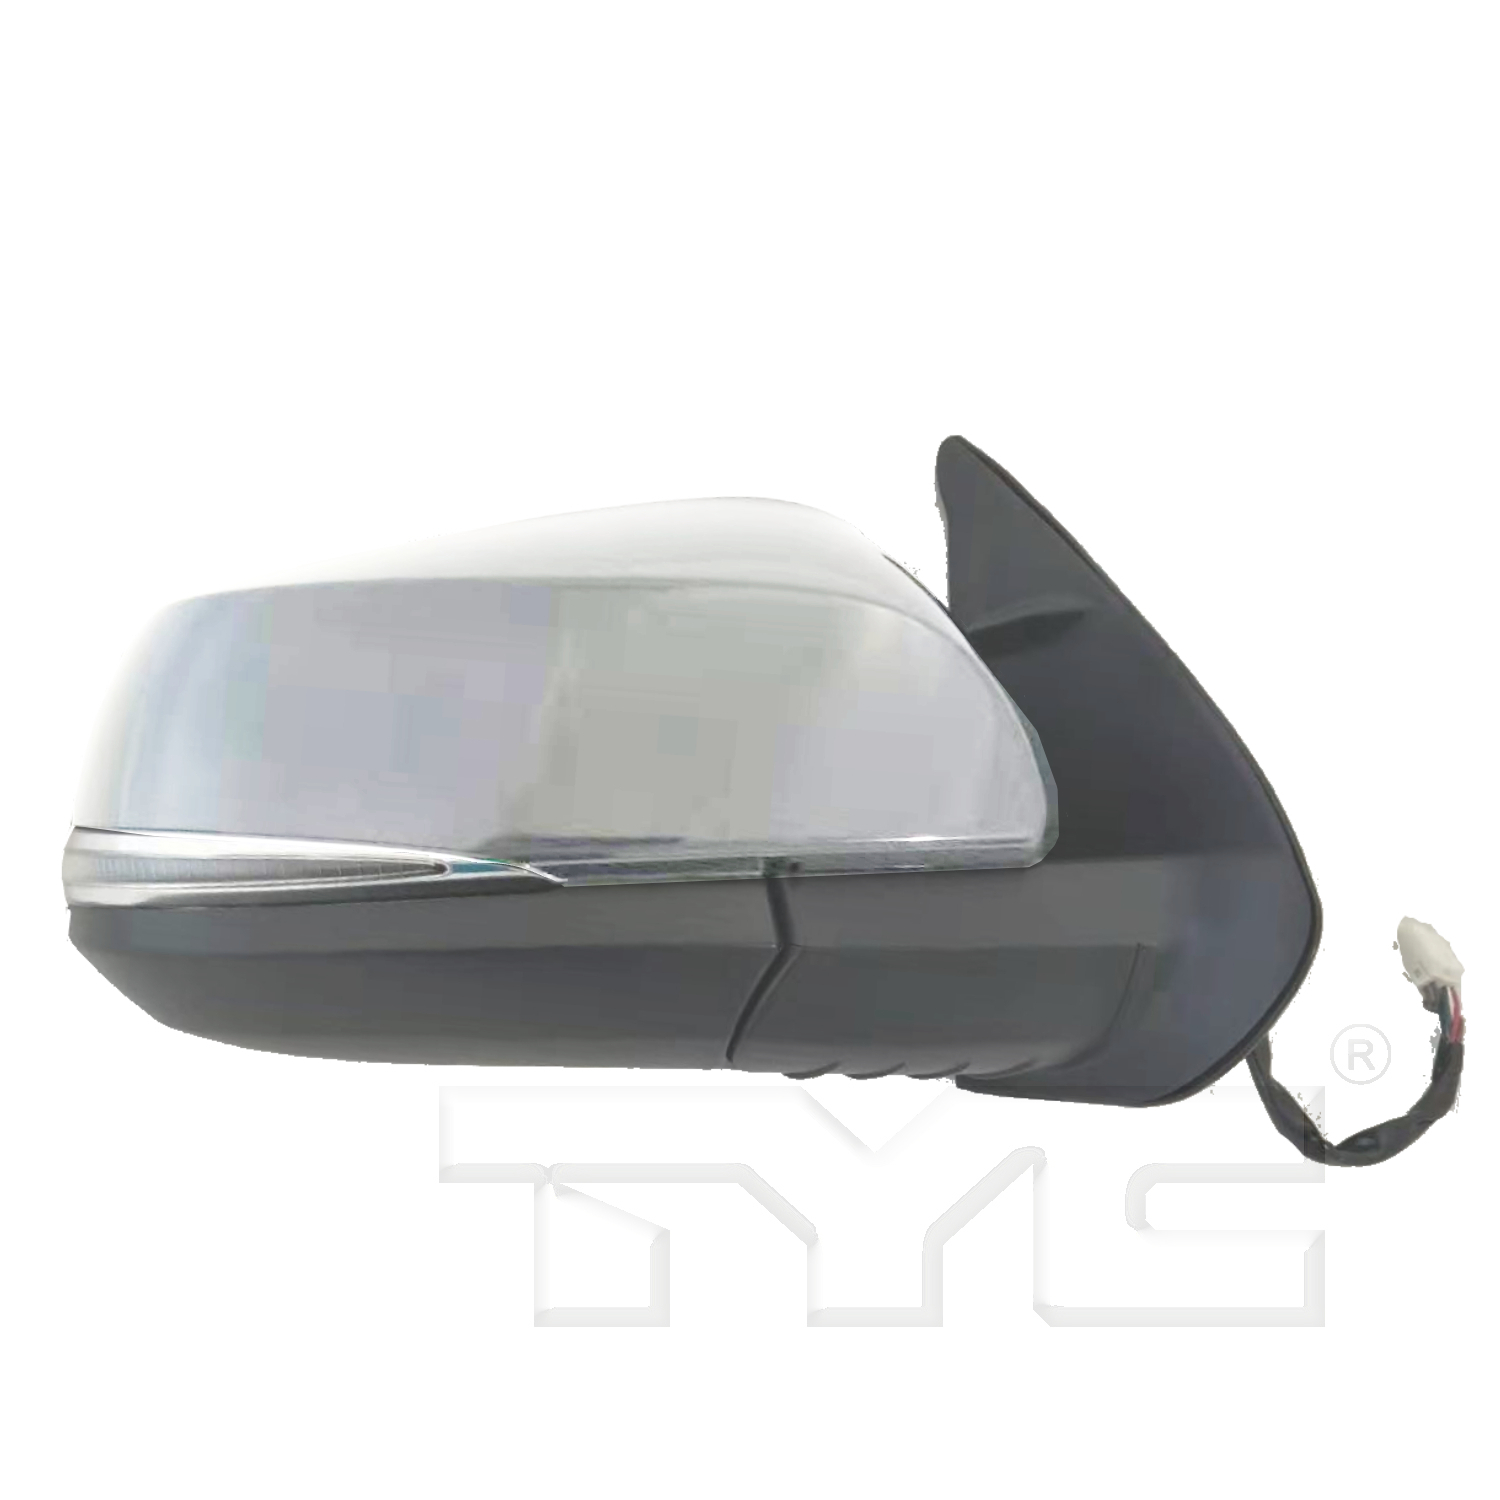 Aftermarket MIRRORS for TOYOTA - TACOMA, TACOMA,16-23,RT Mirror outside rear view